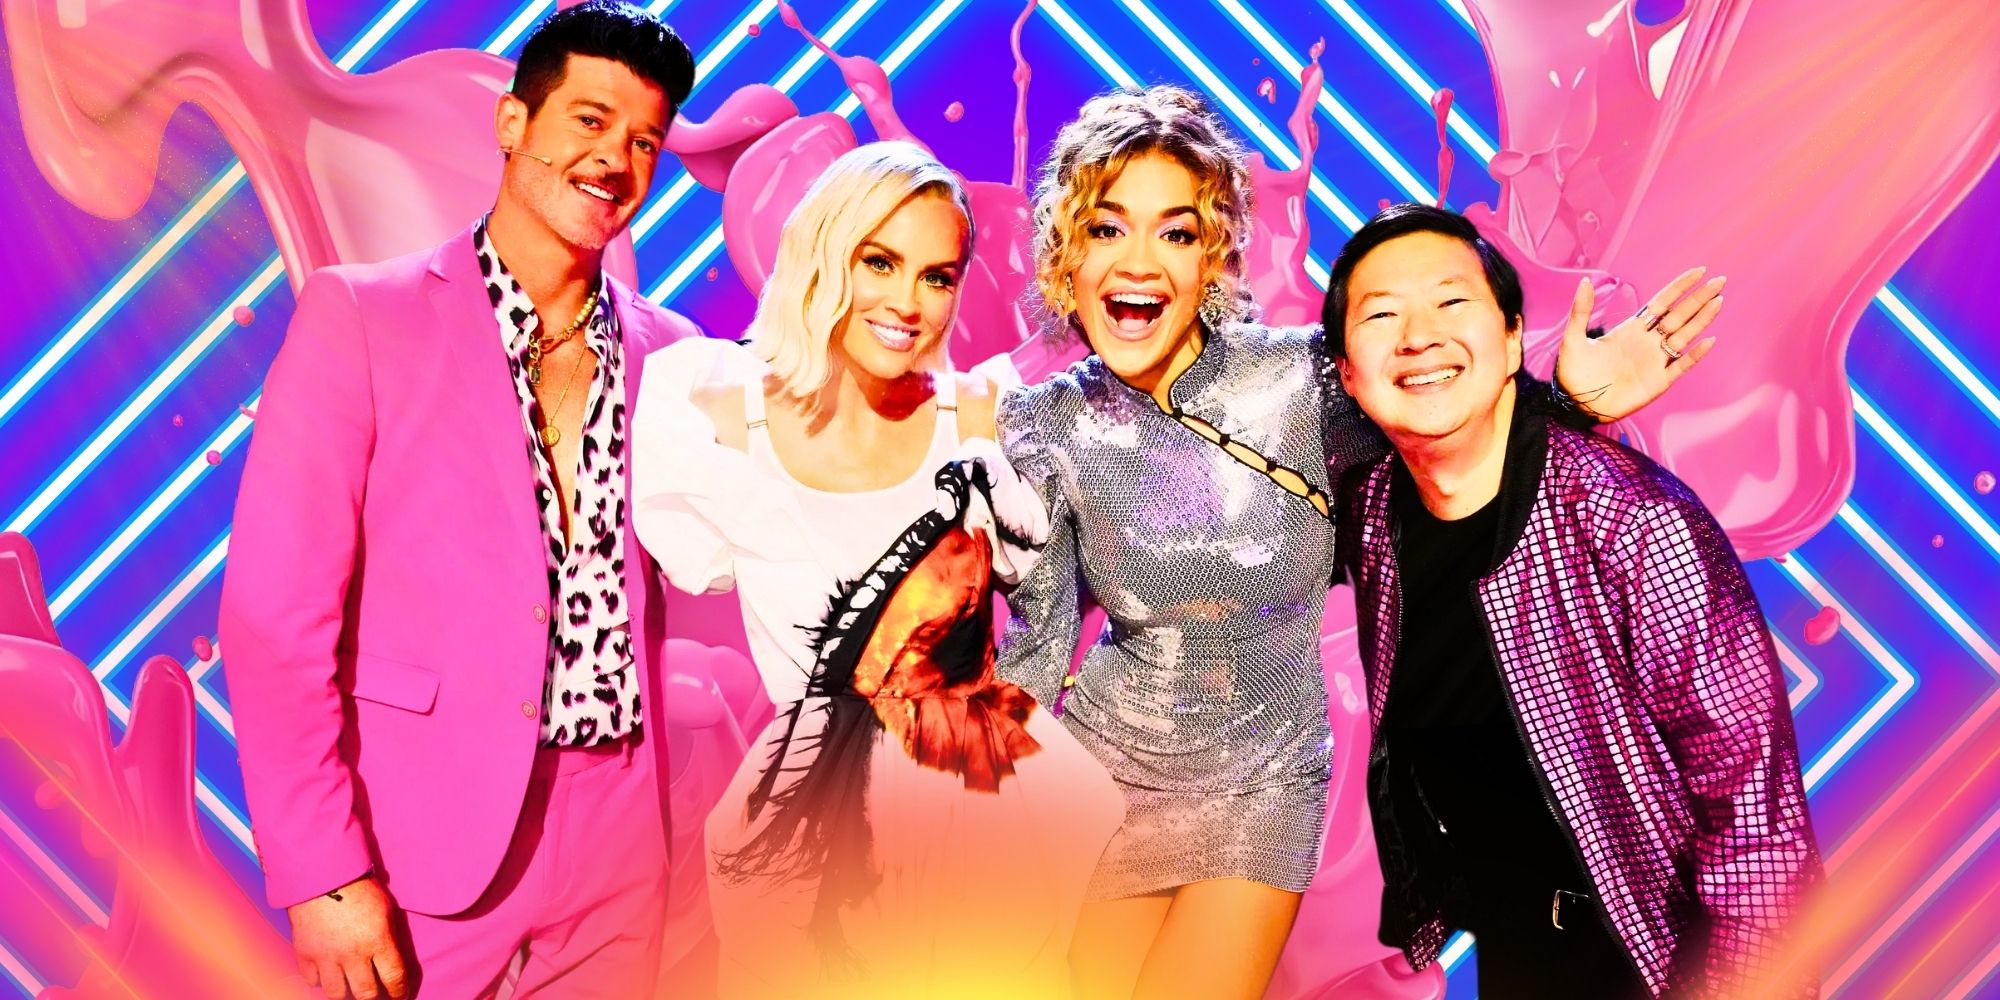 The Masked Singer Season 11 cast of panelists Robin Thicke, Jenny McCarthy, Rita Ora and Ken Jeong, with pink paint splashing behind them